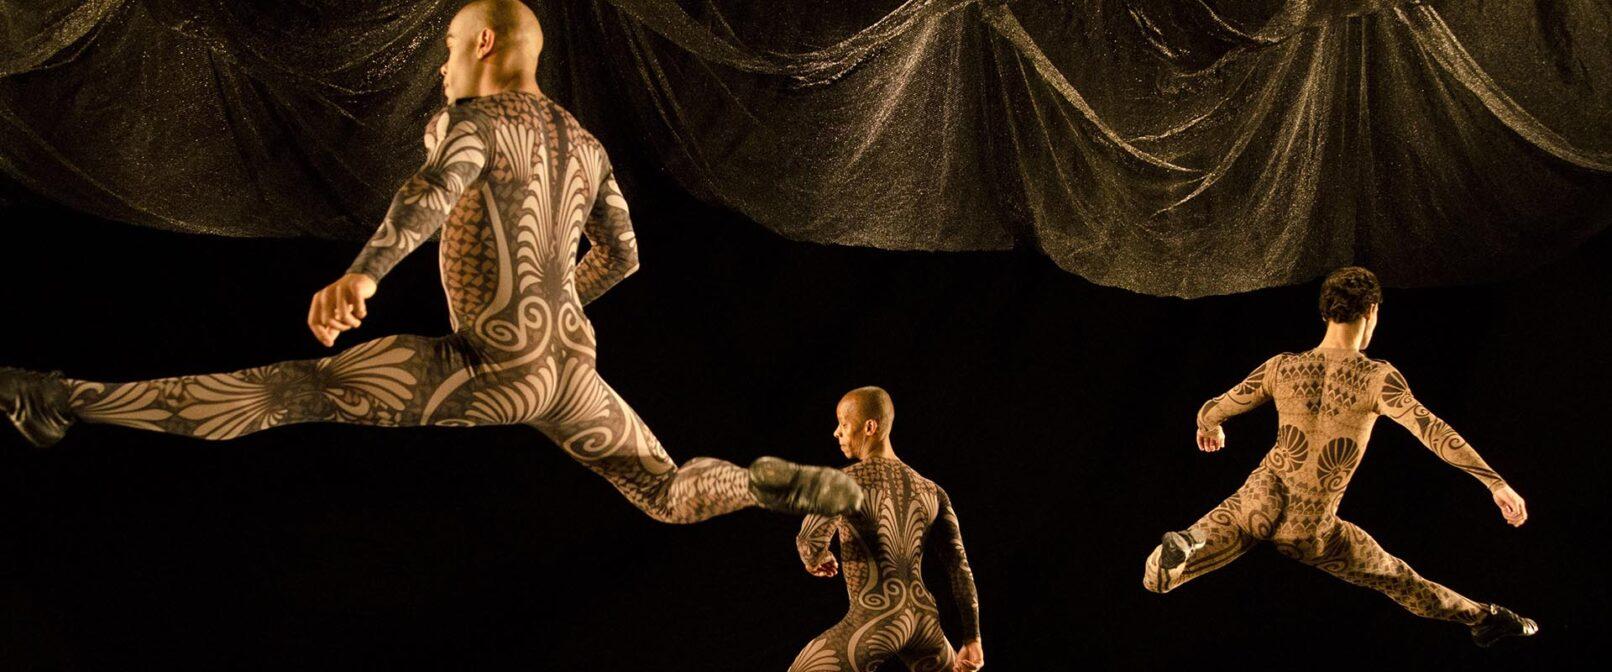 Grupo Corpo. Sem Mim. Three male dancers in skin tight leotards that resemble body tattoos leap on stage against a black backdrop and dark gold coloured curtain.